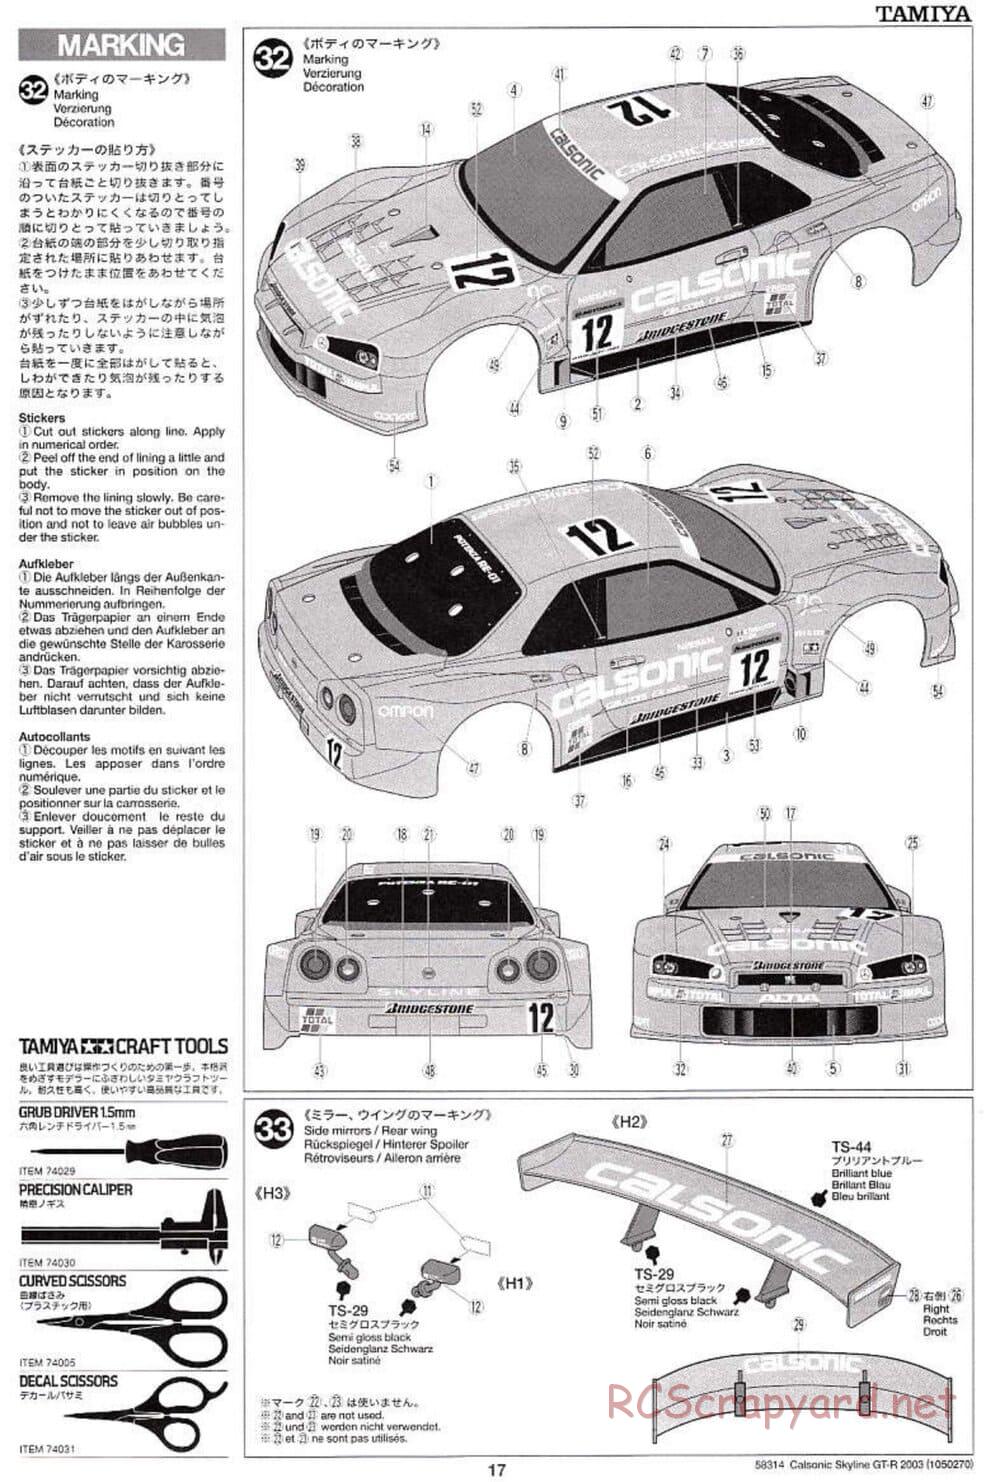 Tamiya - Calsonic Skyline GT-R 2003 - TT-01 Chassis - Manual - Page 17